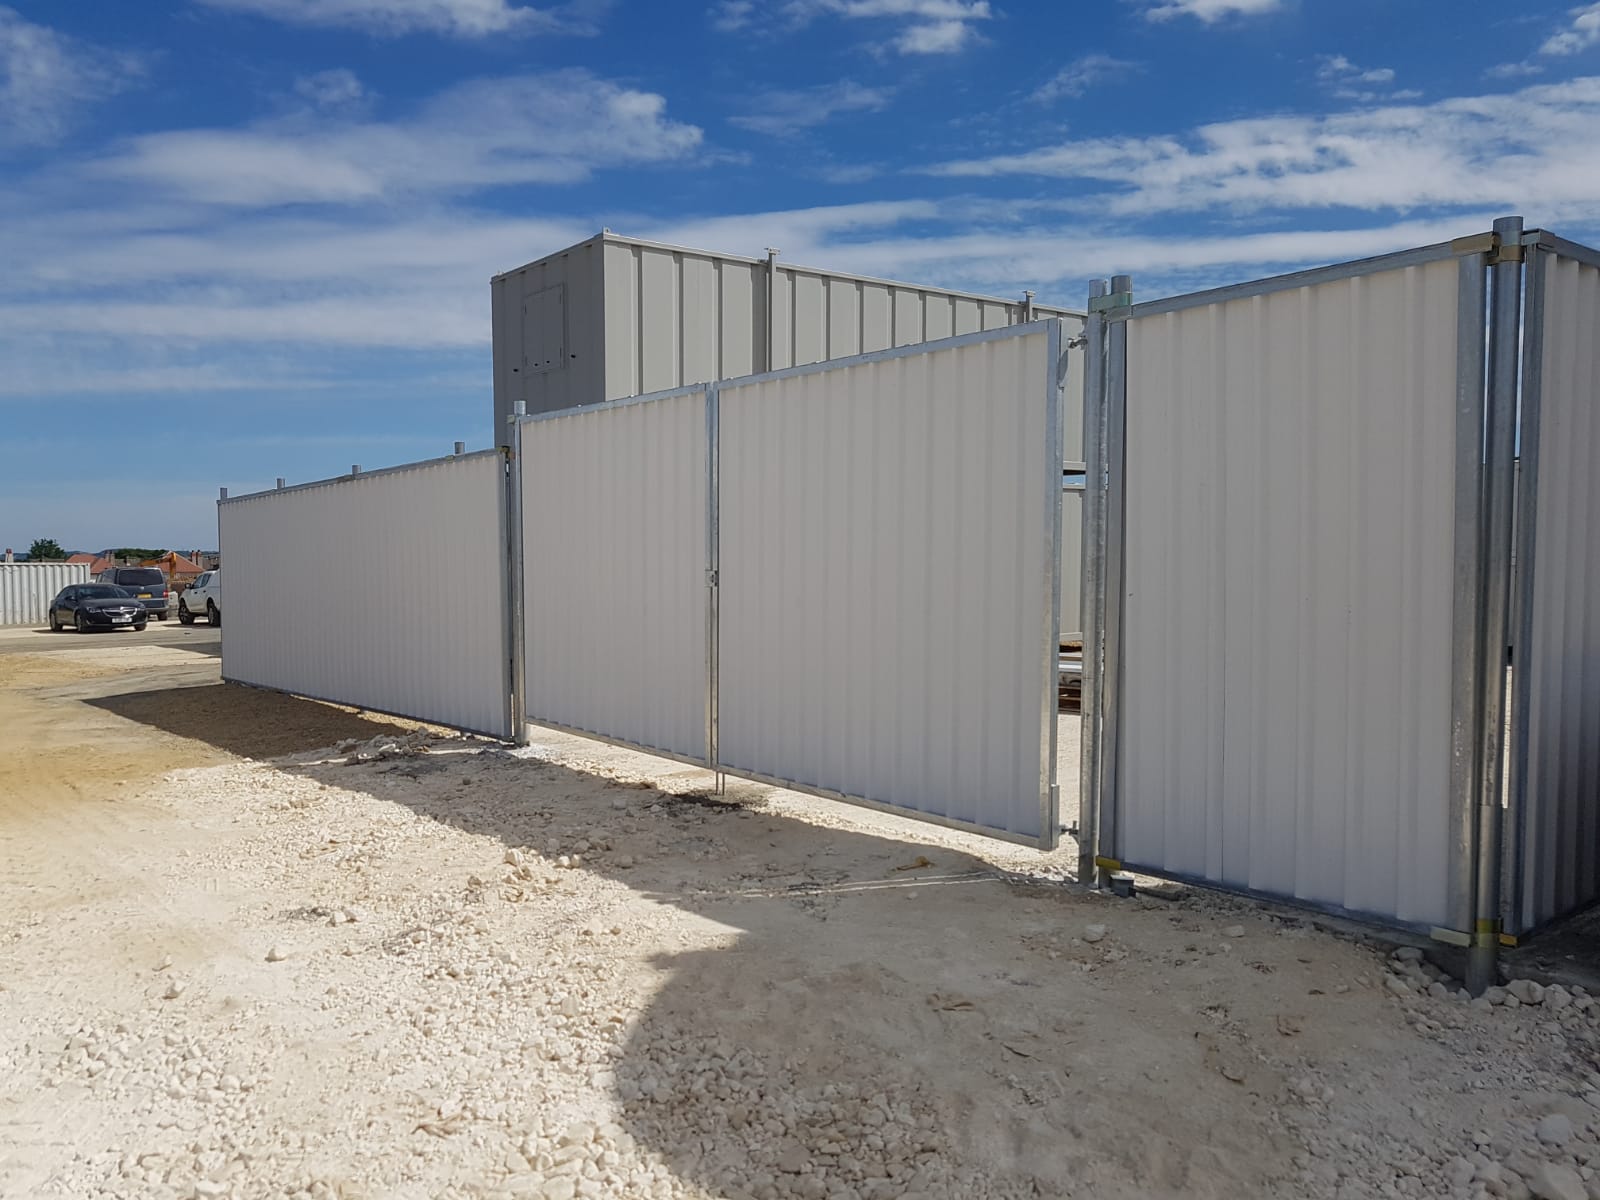 Heras hoarding panels and gates